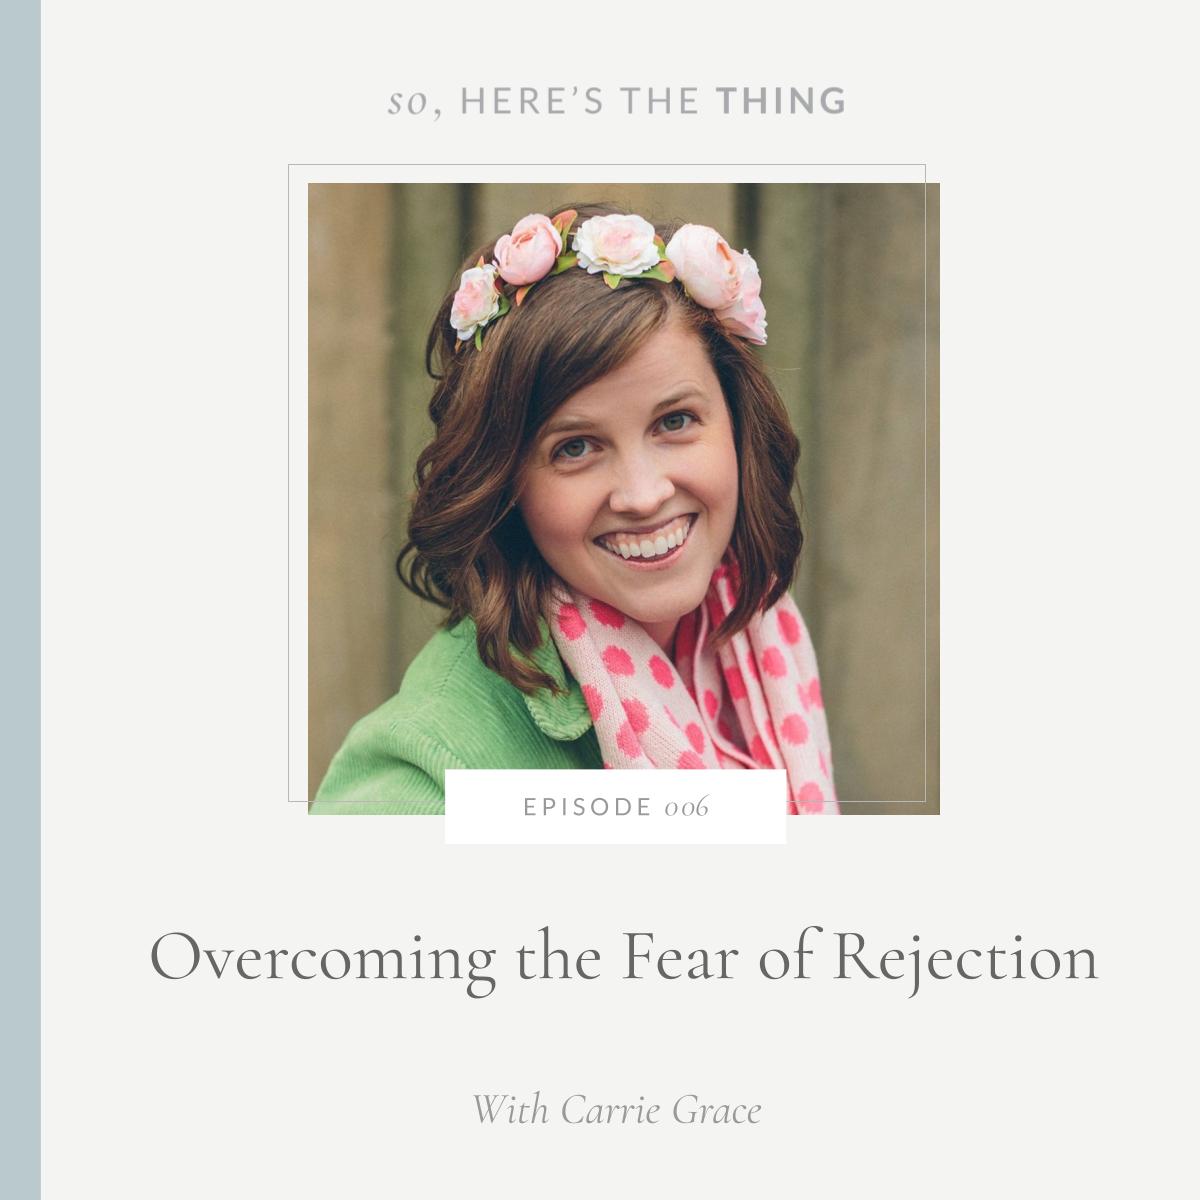 Overcoming the Fear of Rejection